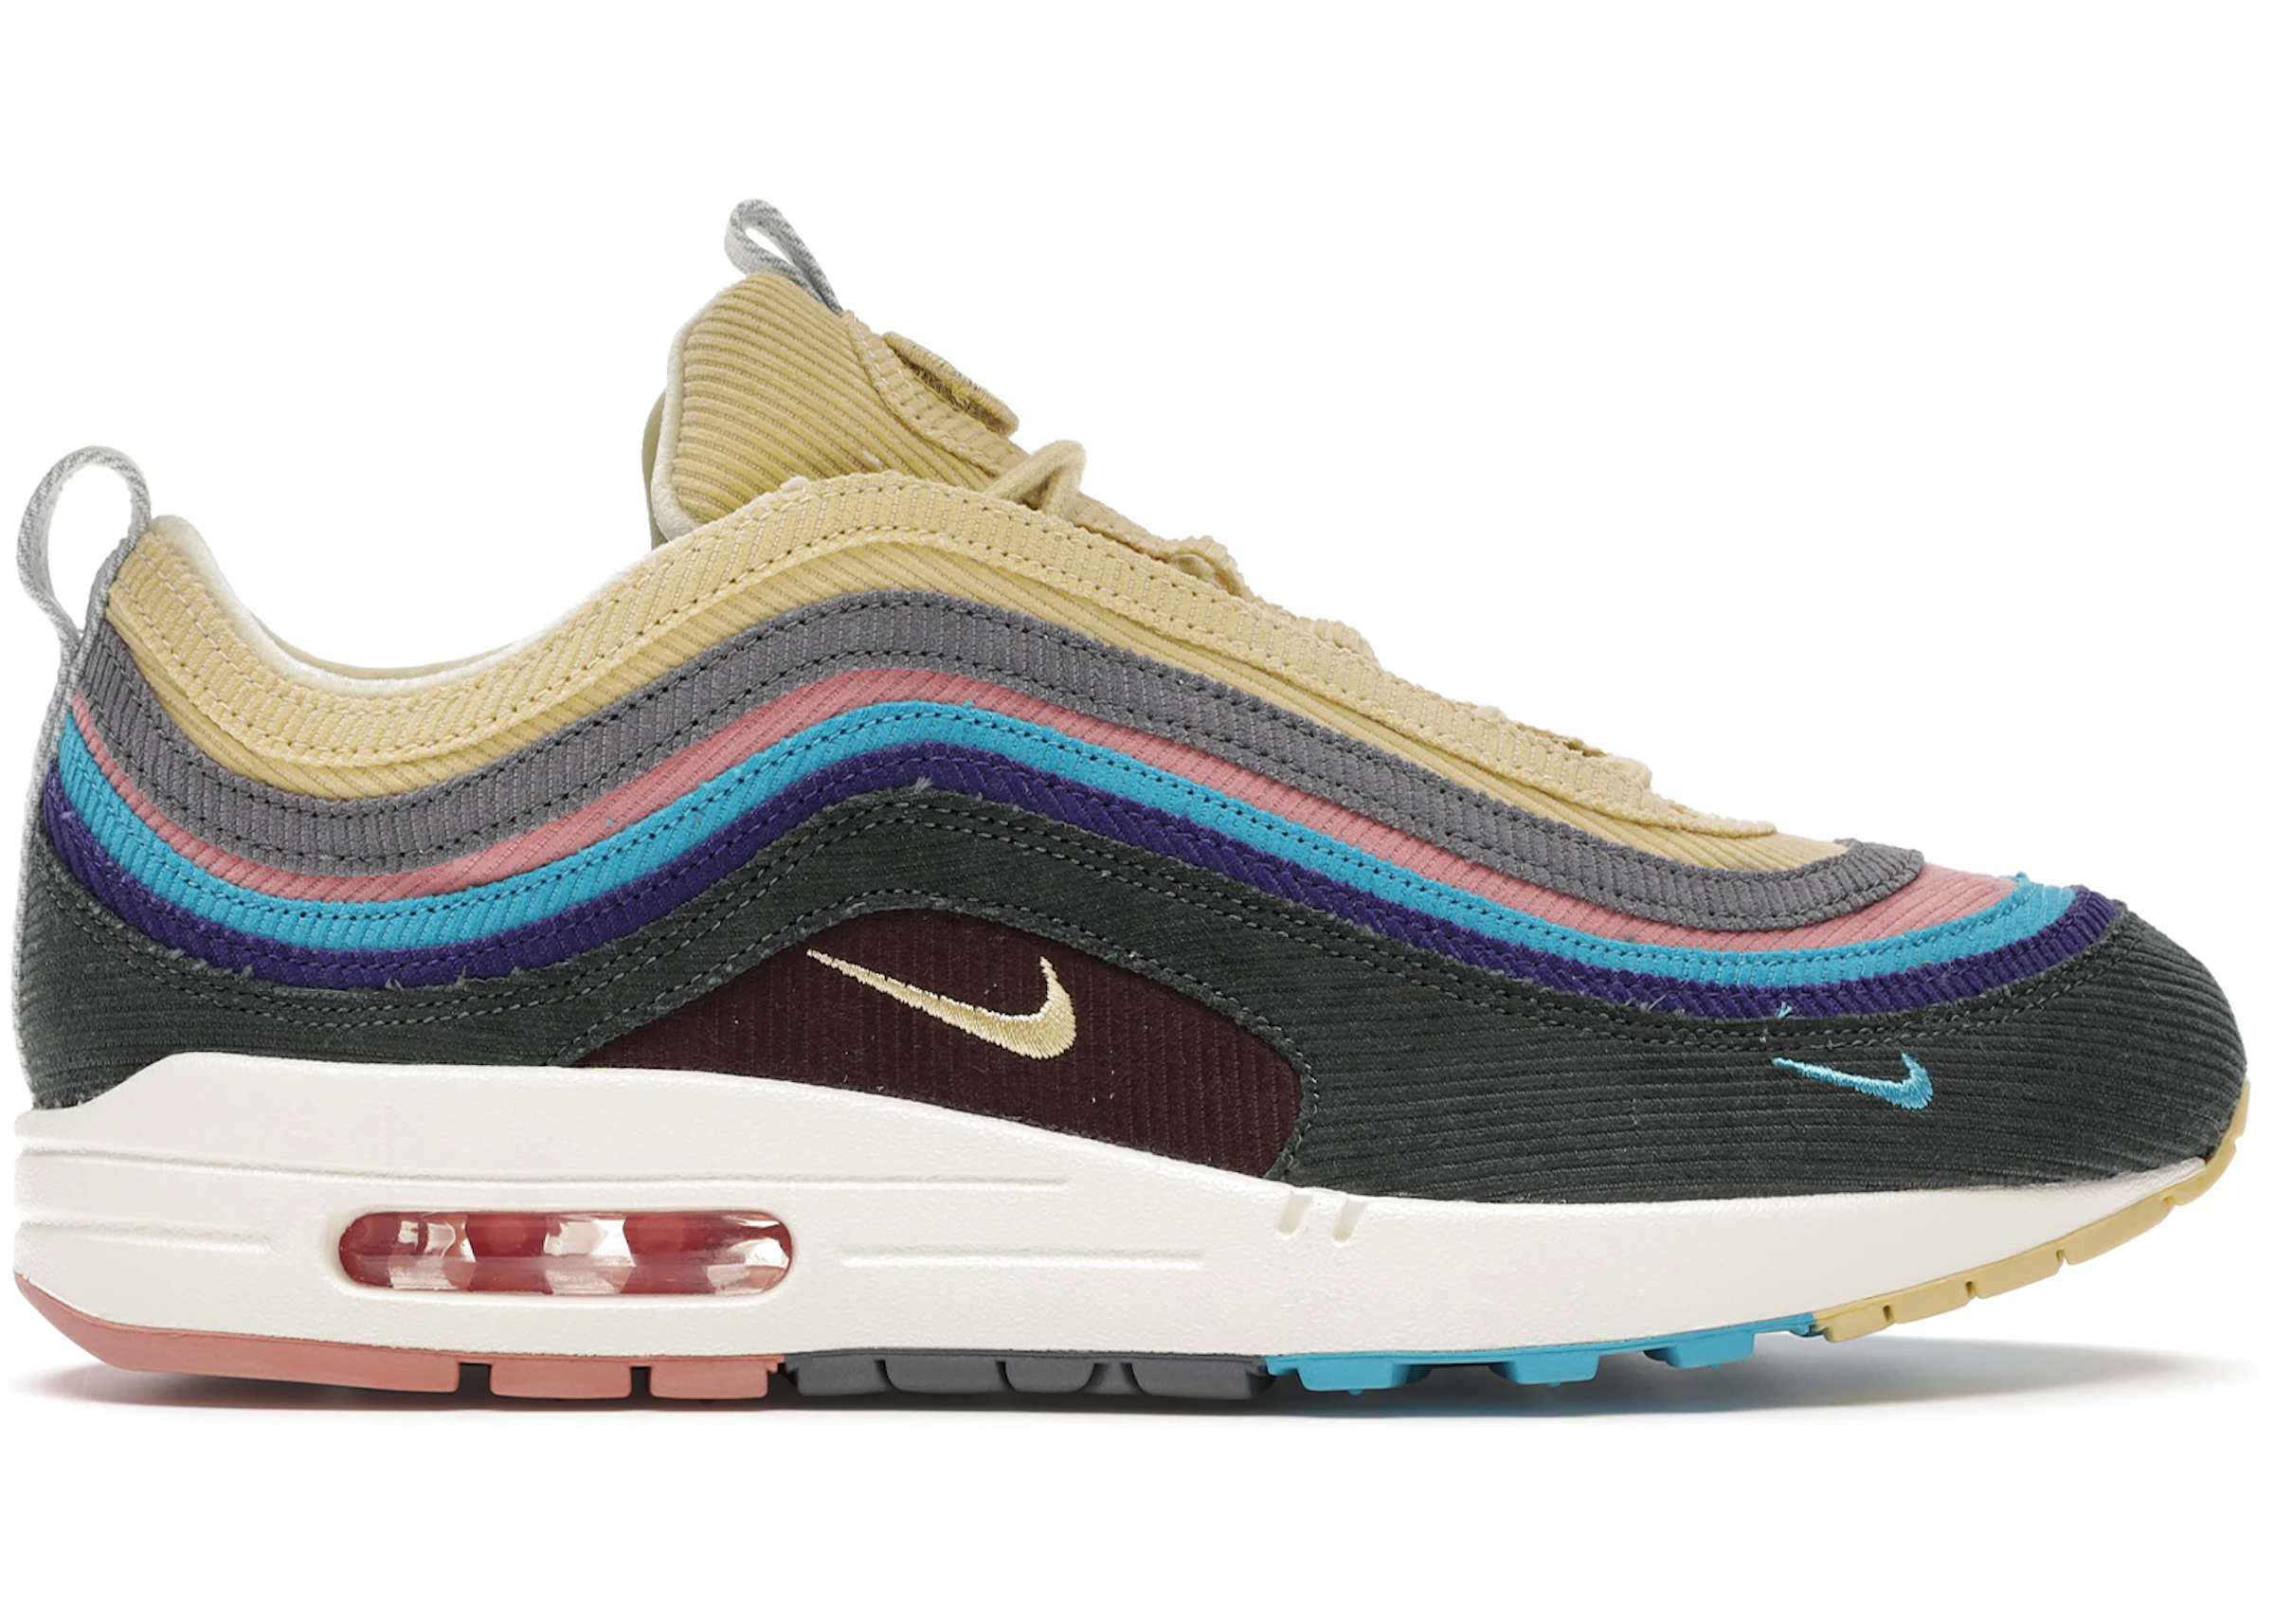 Stad bloem Gespecificeerd Bewust Nike Air Max 1/97 Sean Wotherspoon (All Accessories and Dustbag) -  AJ4219-400 - US